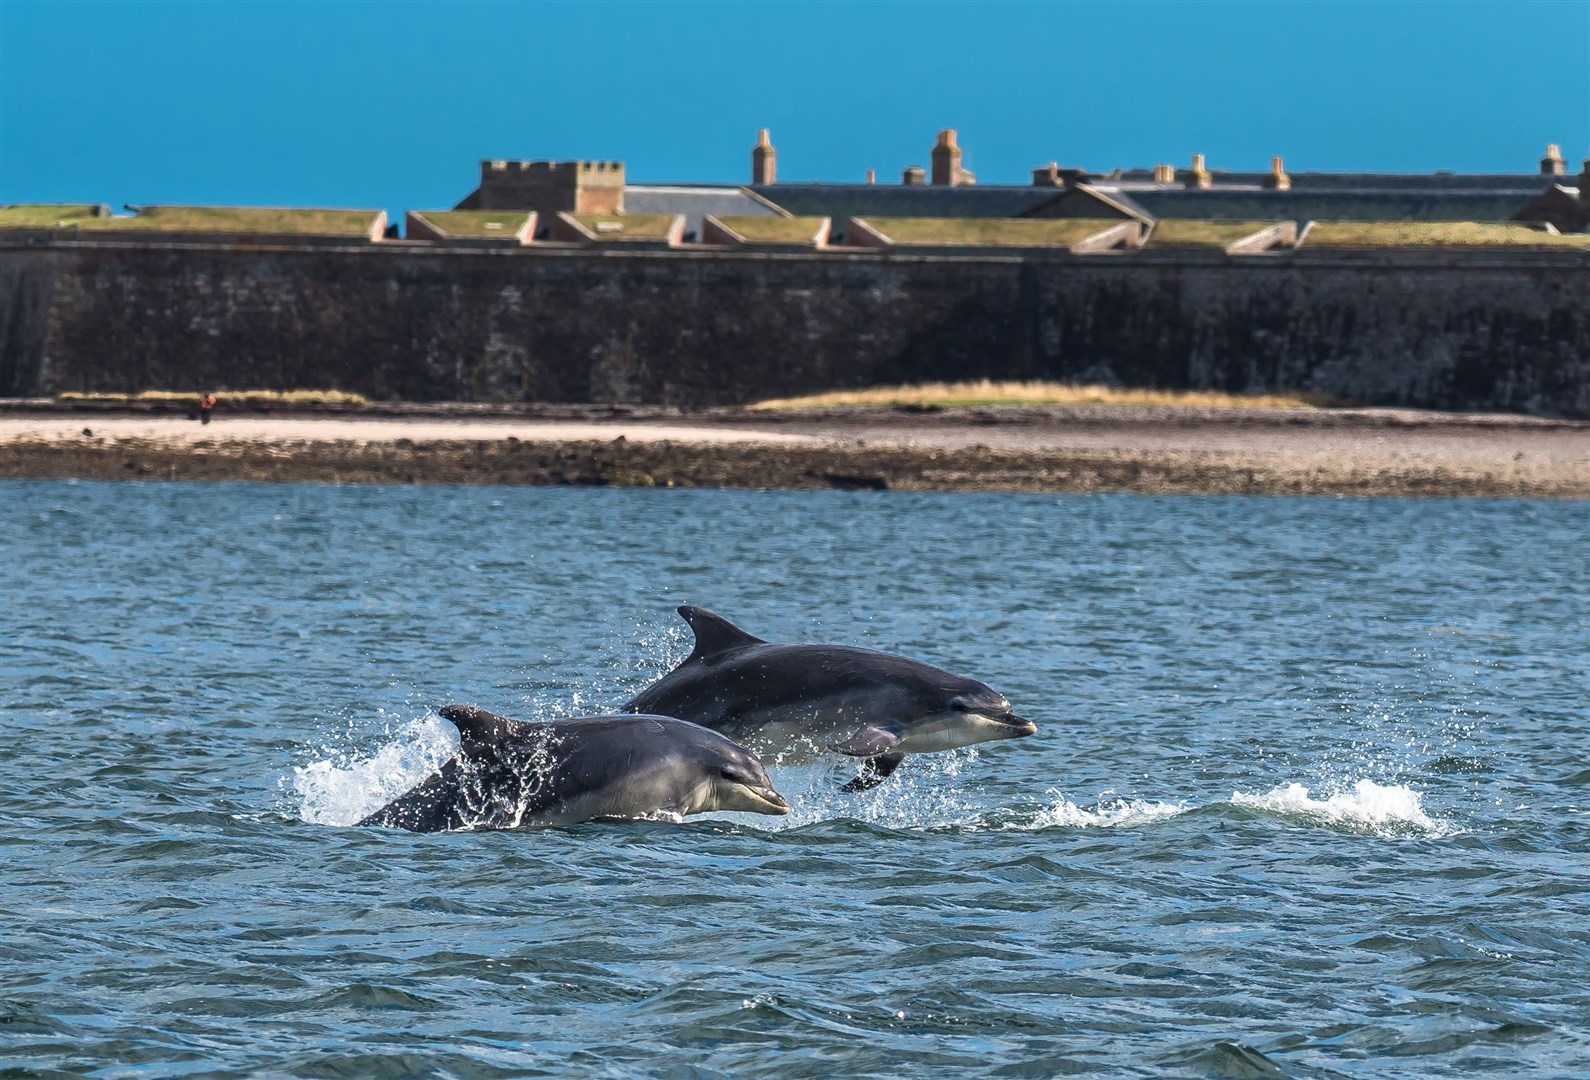 Bottlenose dolphins jumping in the Moray Firth by Fort George.